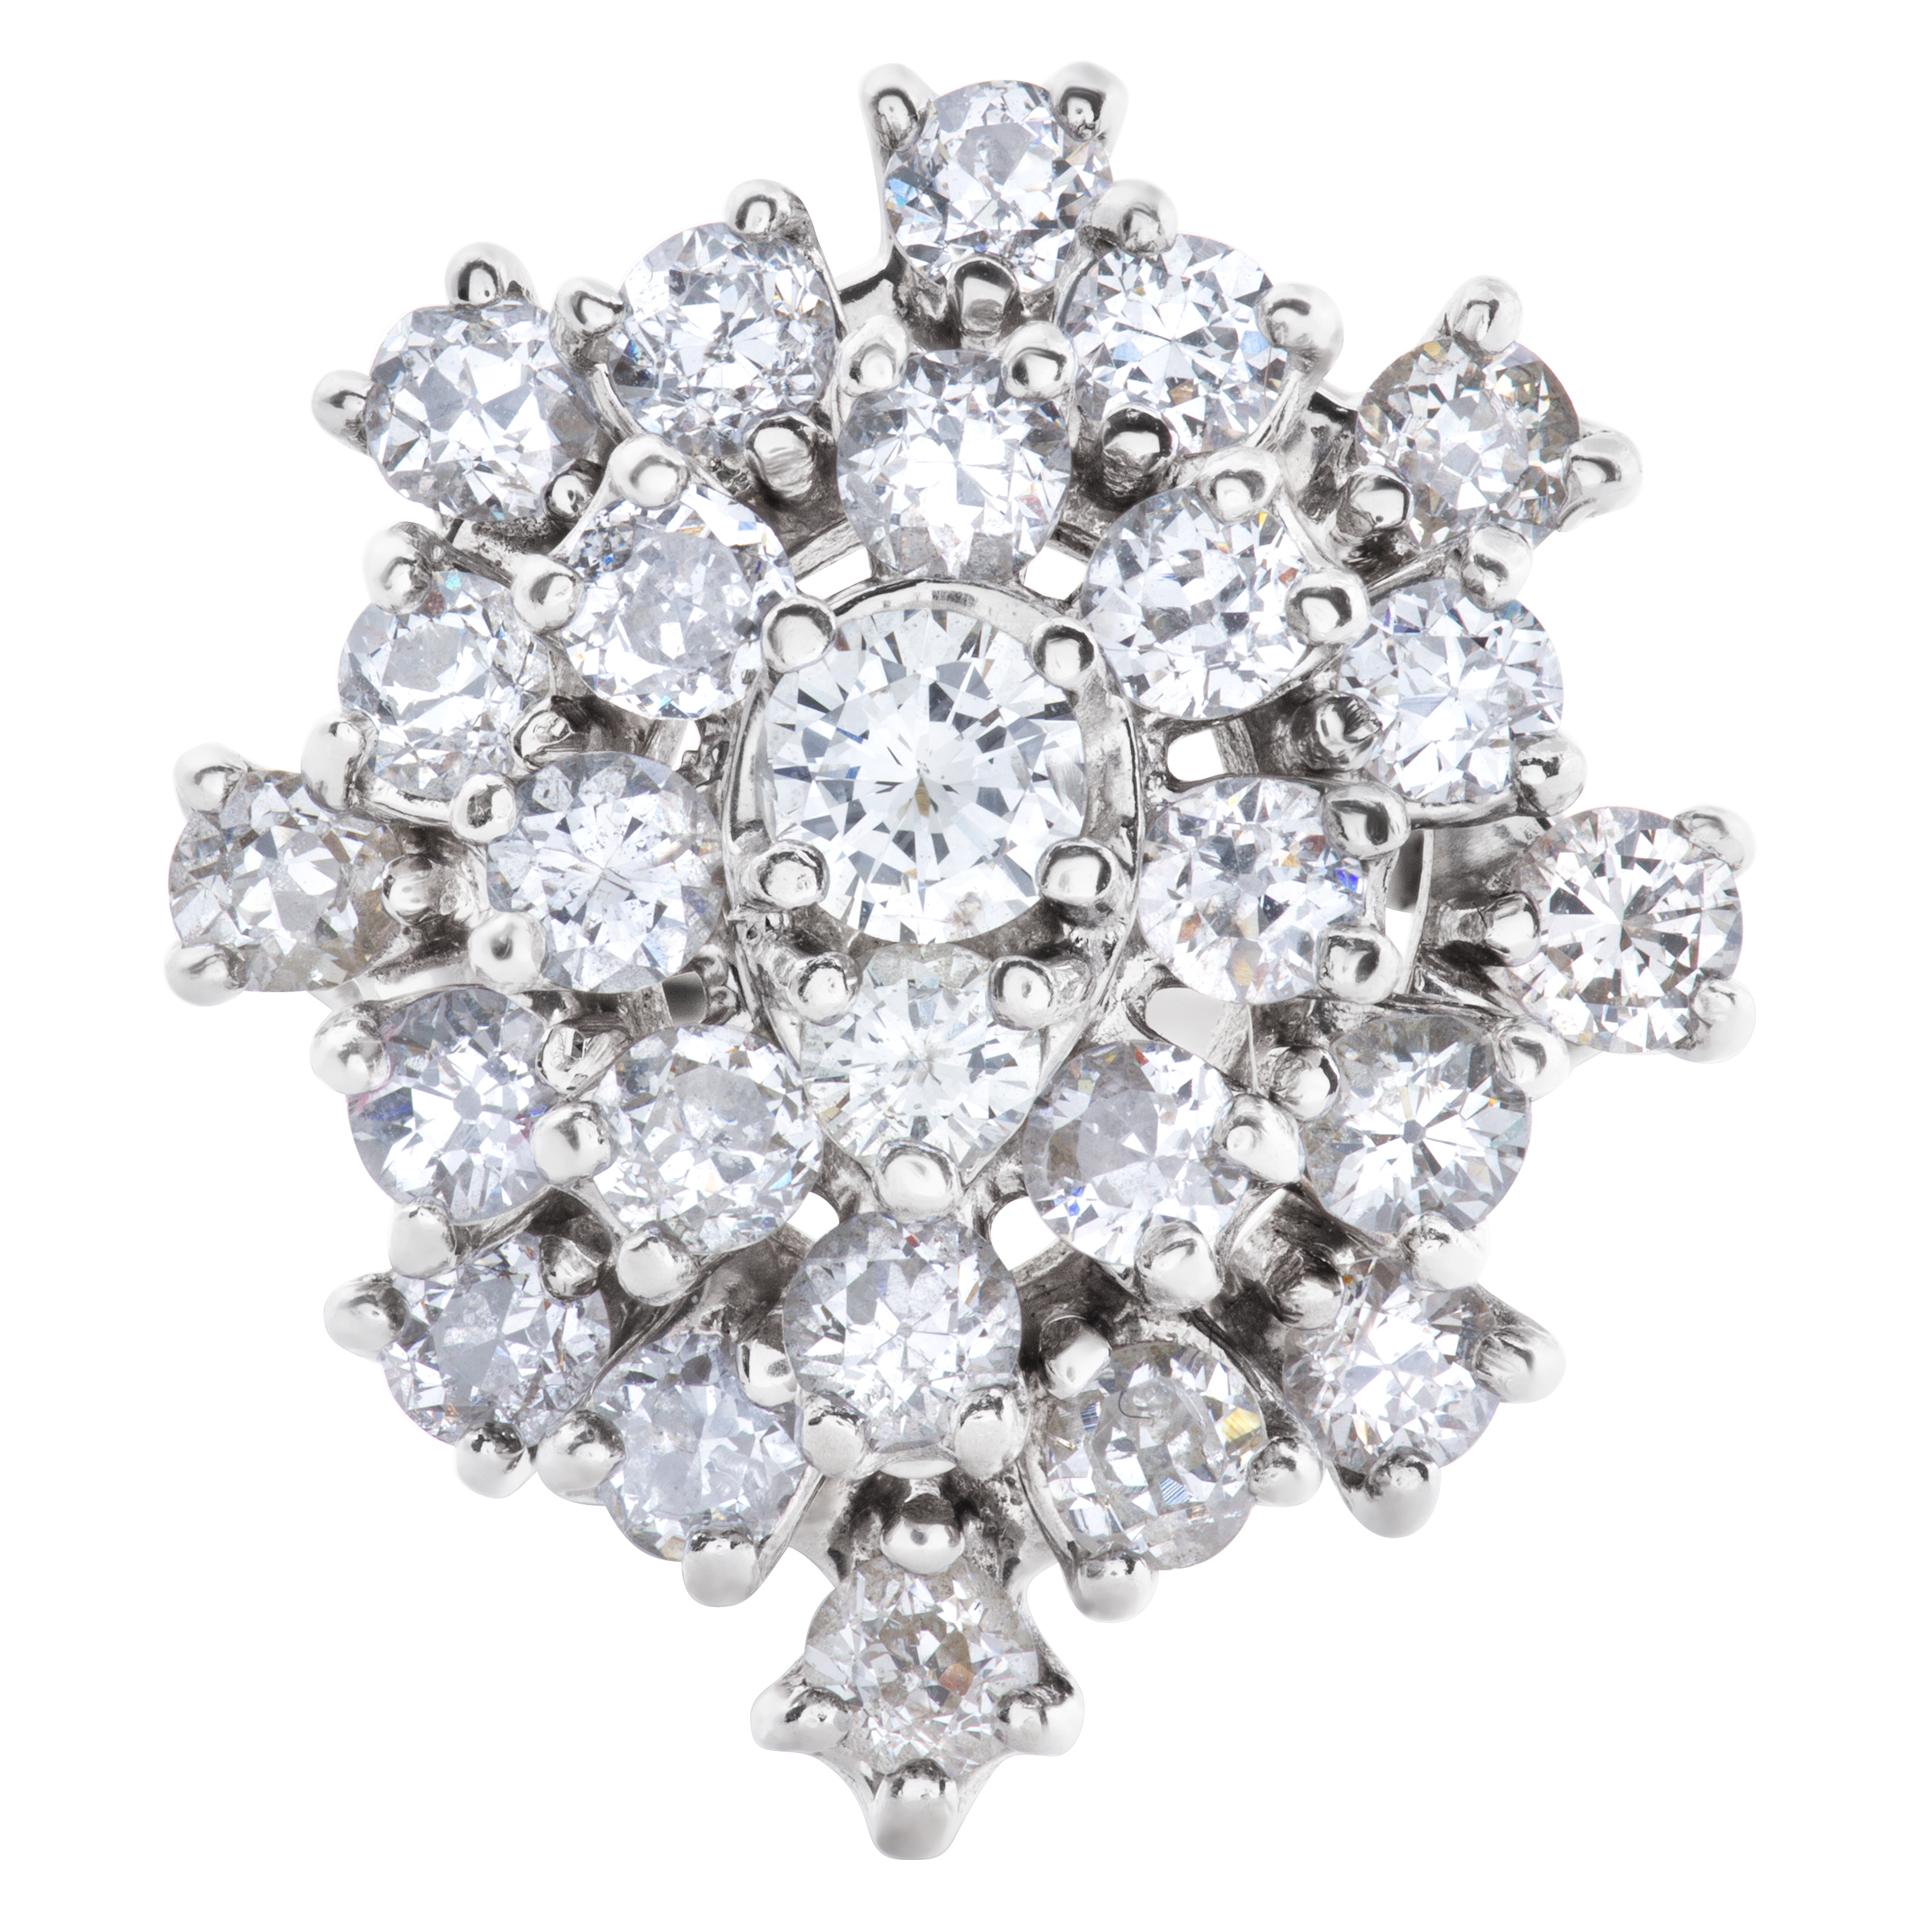 Glamorous diamond cluster ring with approximately 1.50 carats in full cut round brilliant diamonds set in 18k white gold. Diamonds estimate : H-I color, VS clarity. Cluster 3/4 x 3/4